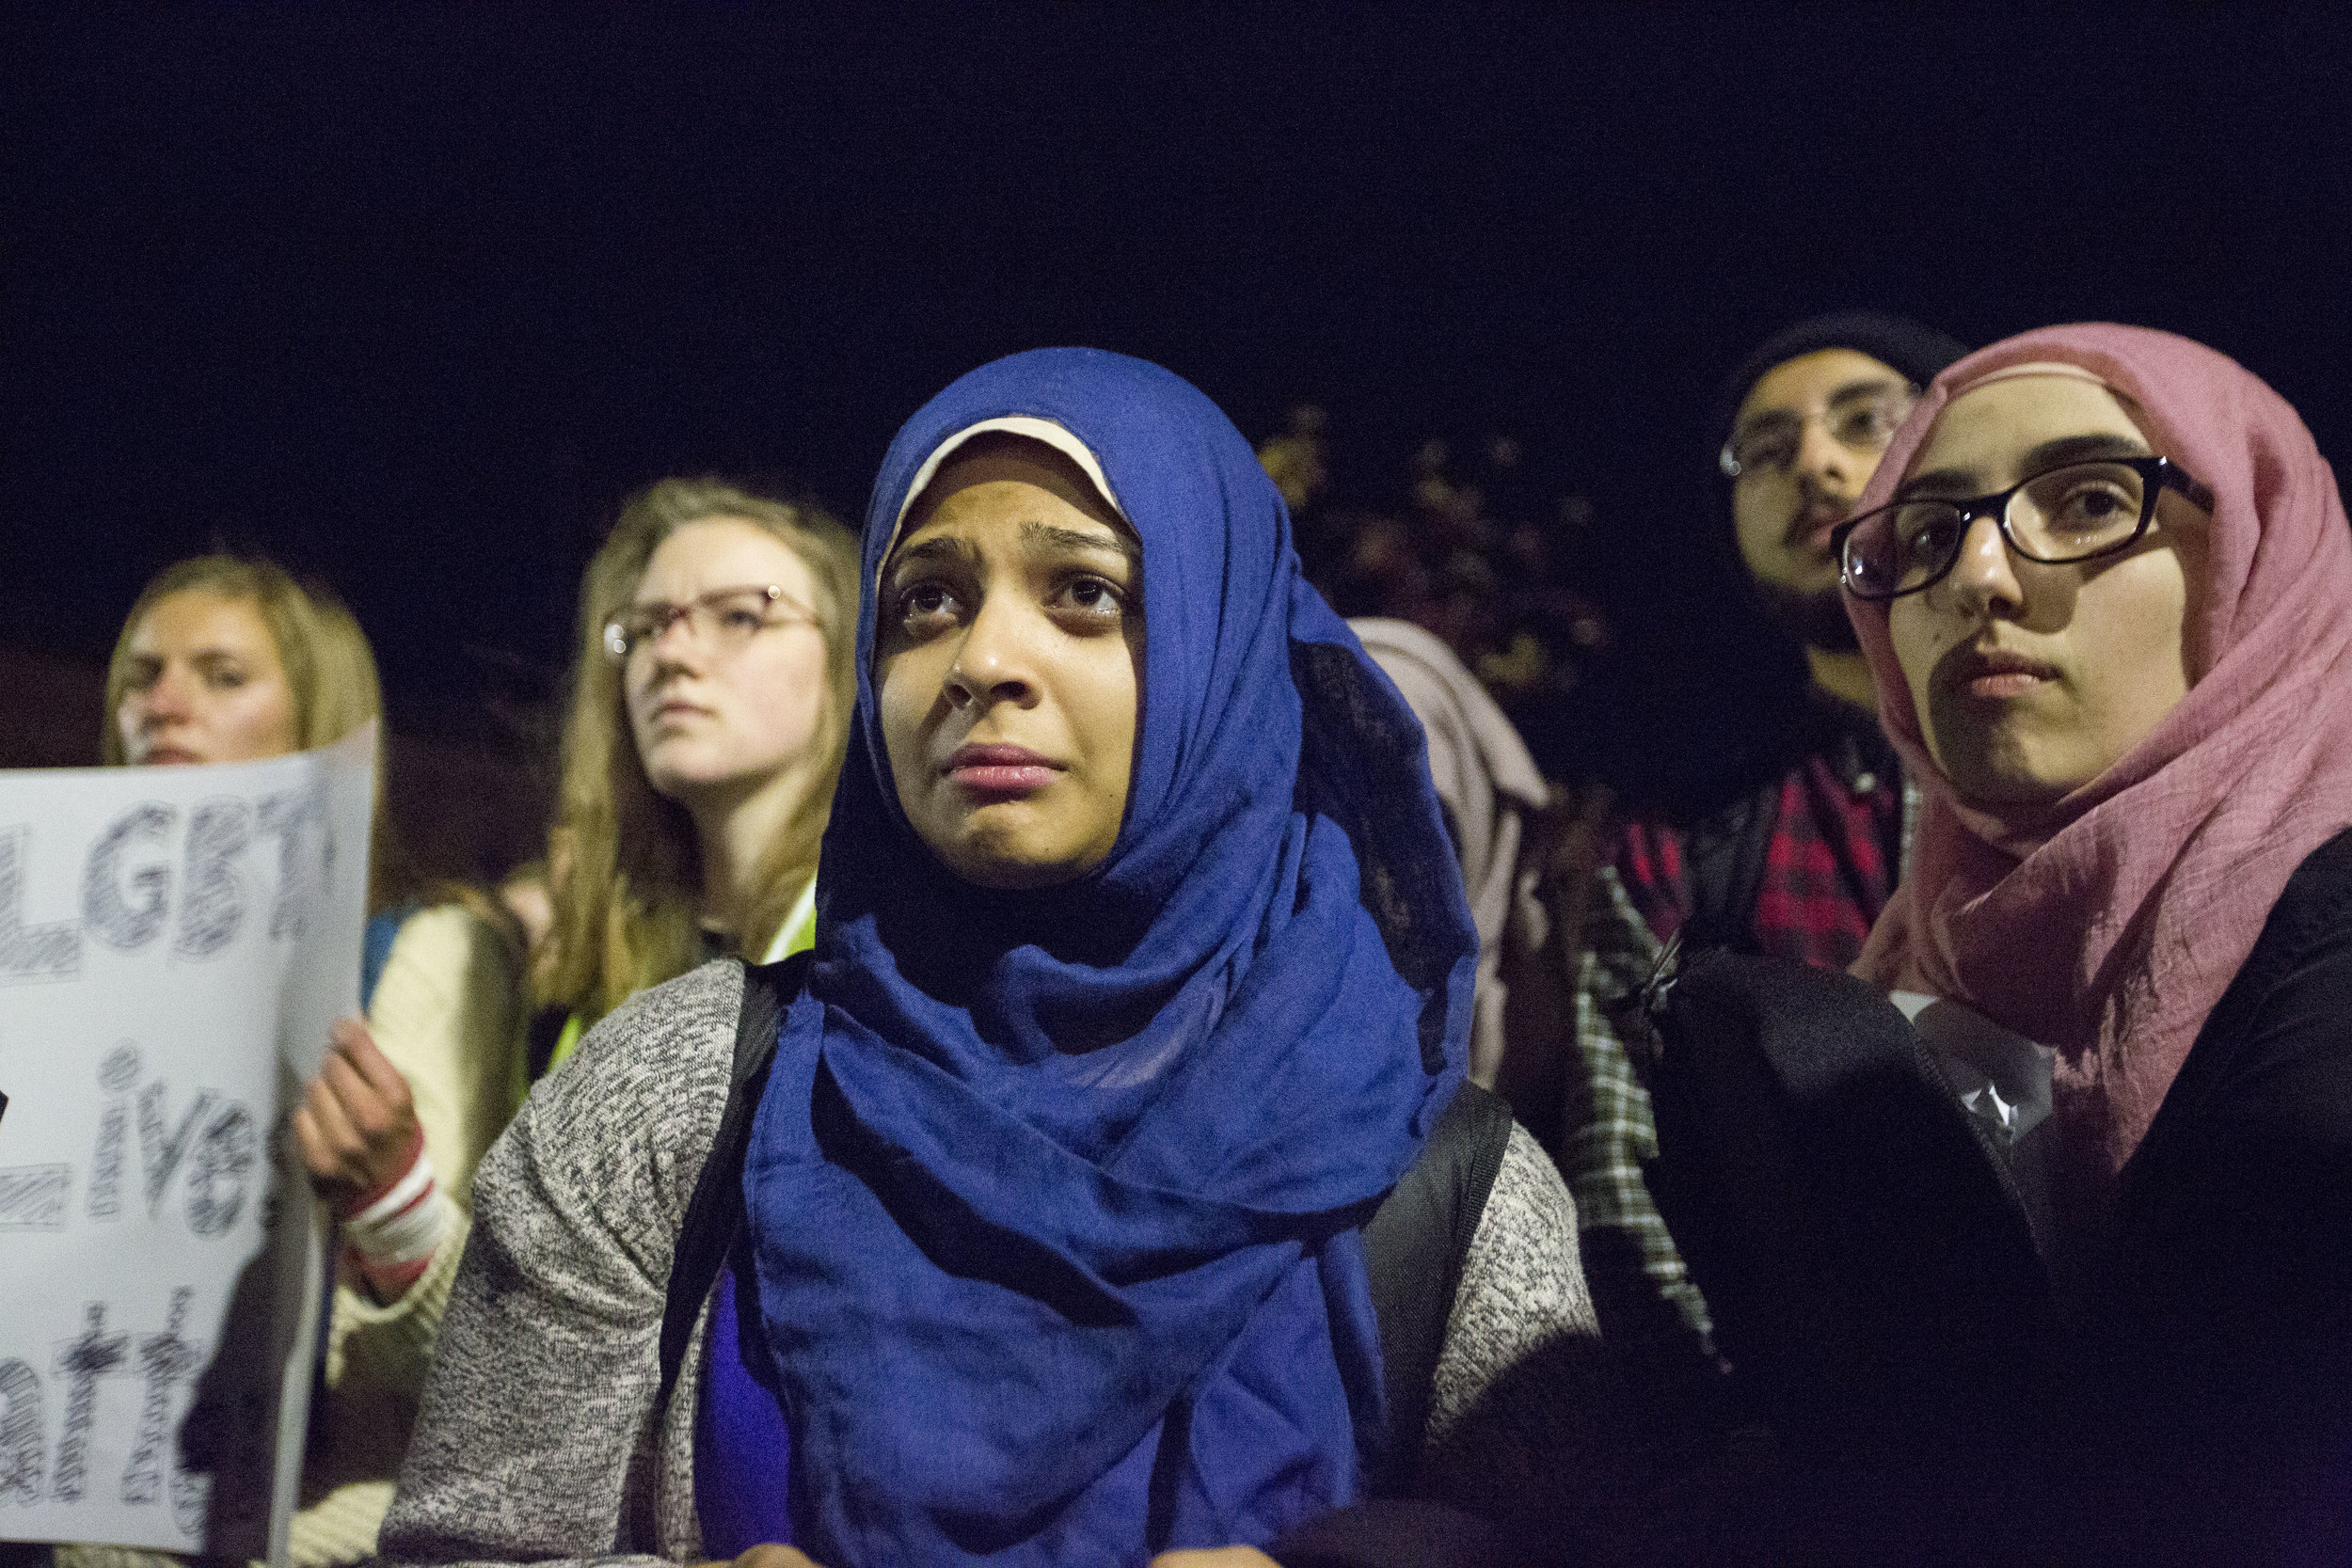  UW-Students get emotional during an anti-Trump rally on Nov 10, 2016 in Madison, WI. 